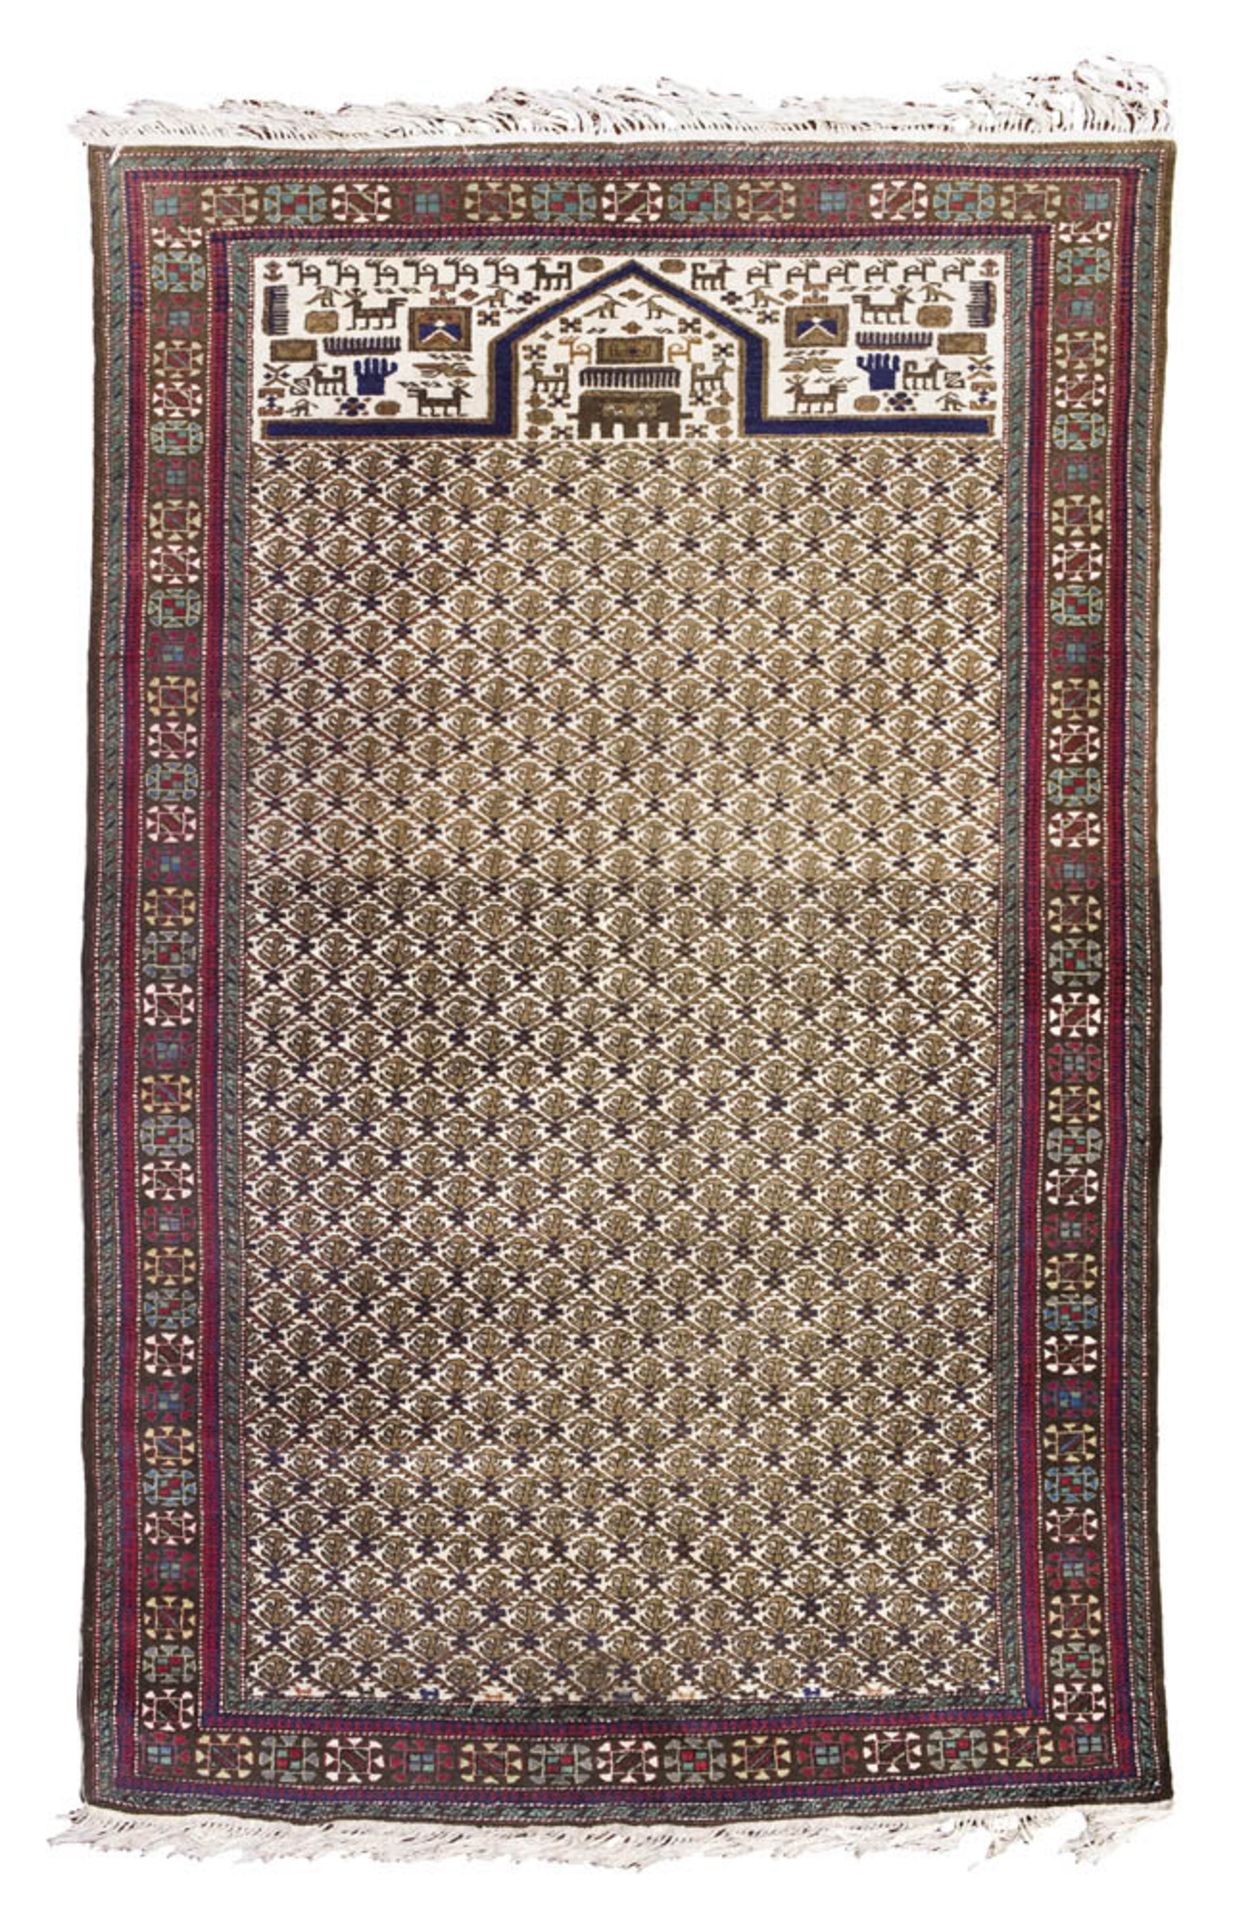 ARDEBIL CARPET, MID 20TH SECOLO with design of 'Daghestan', on white ground in the central field.